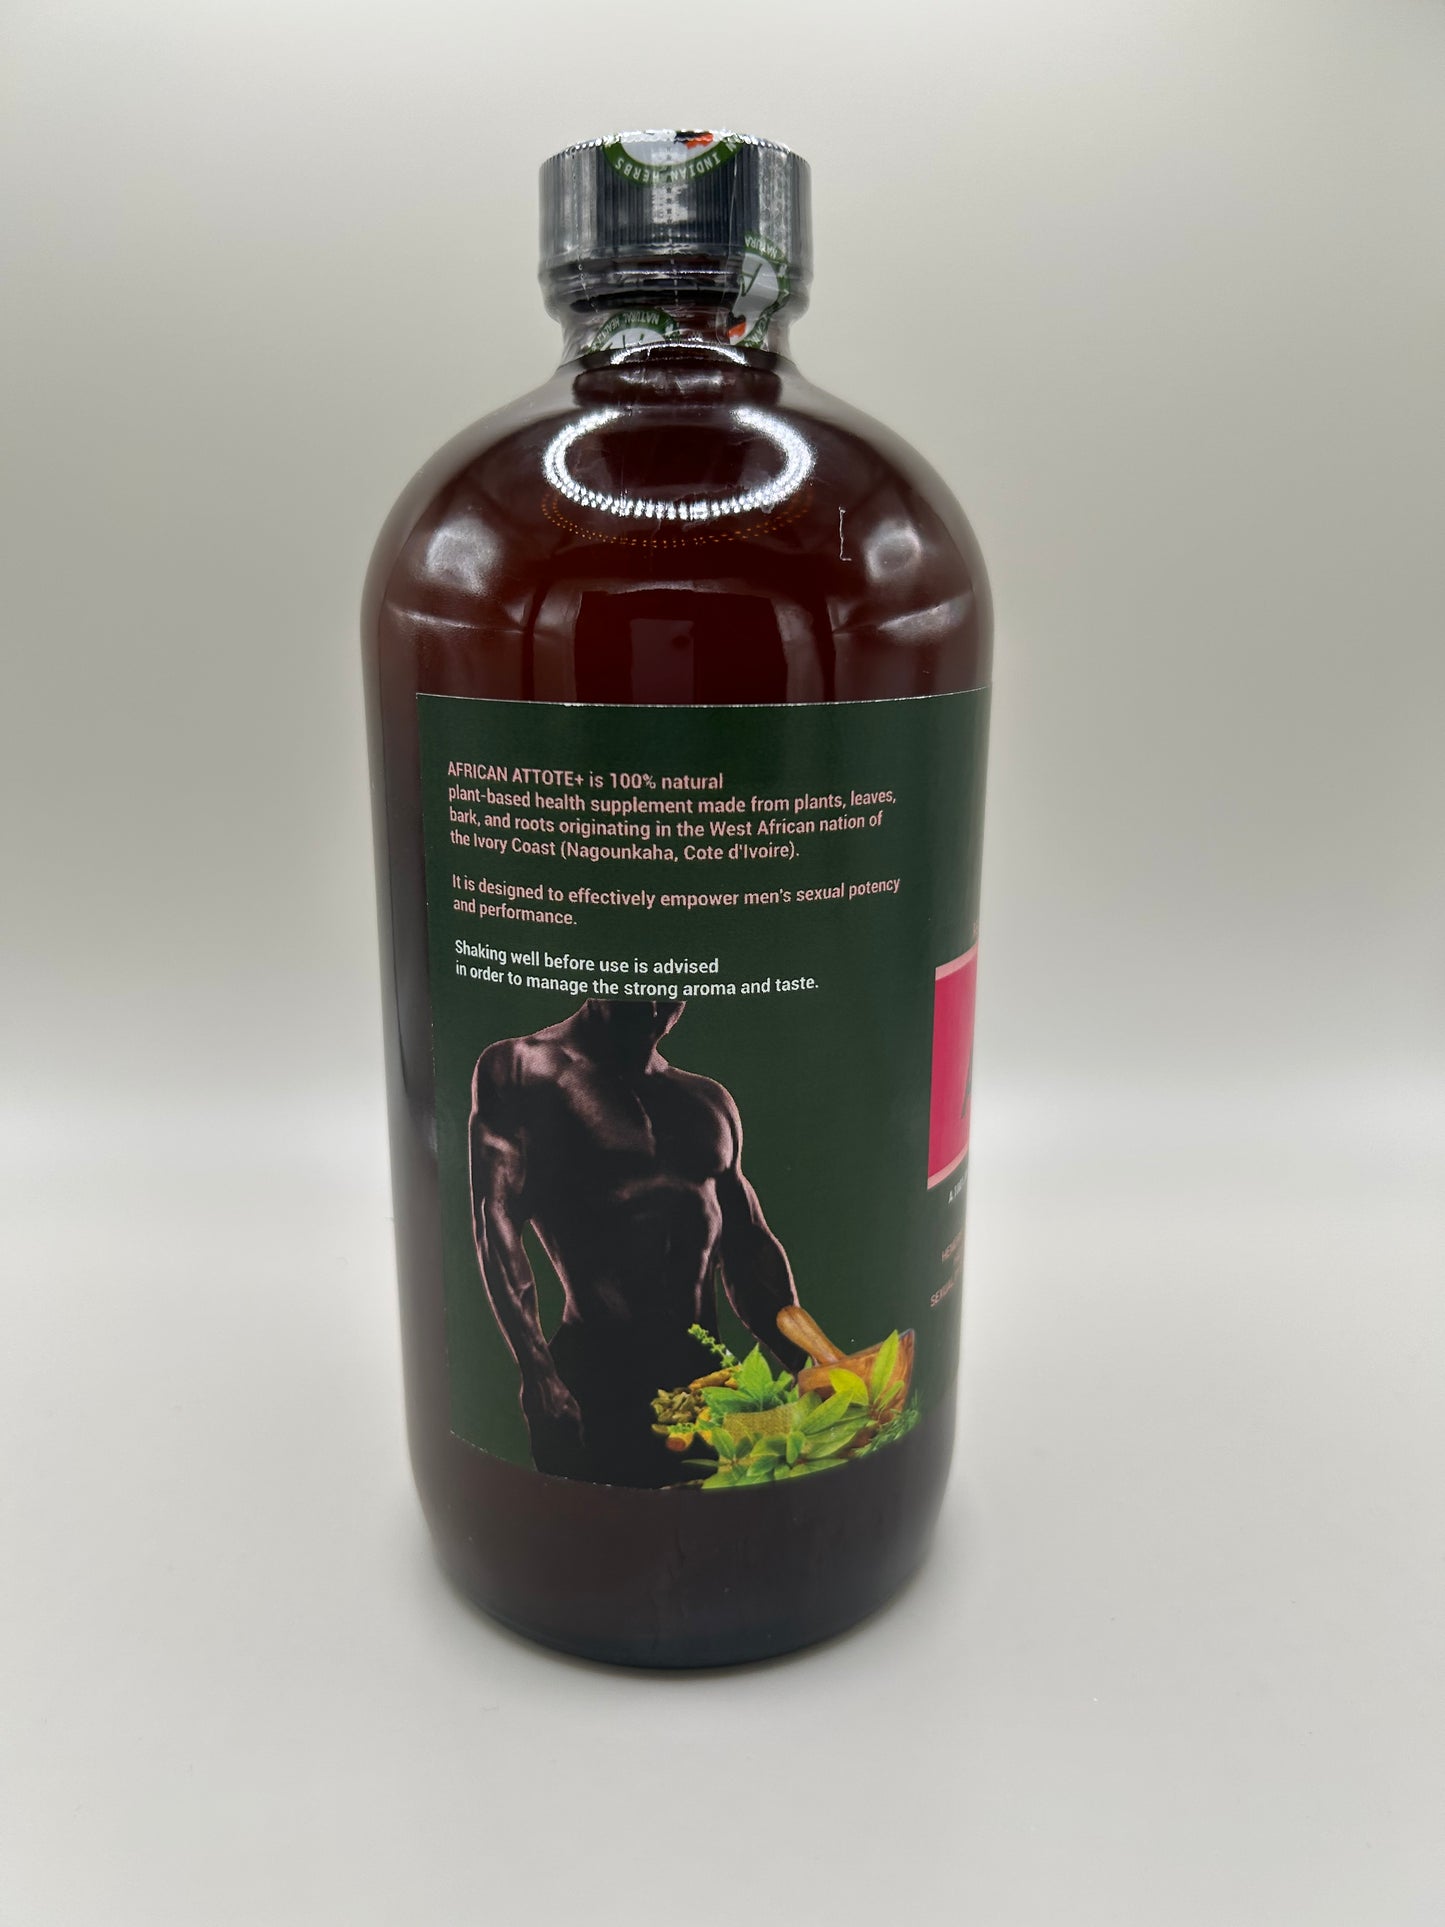 ATTOTE Organic Herbal Drink/ Made in Ivory Coast 